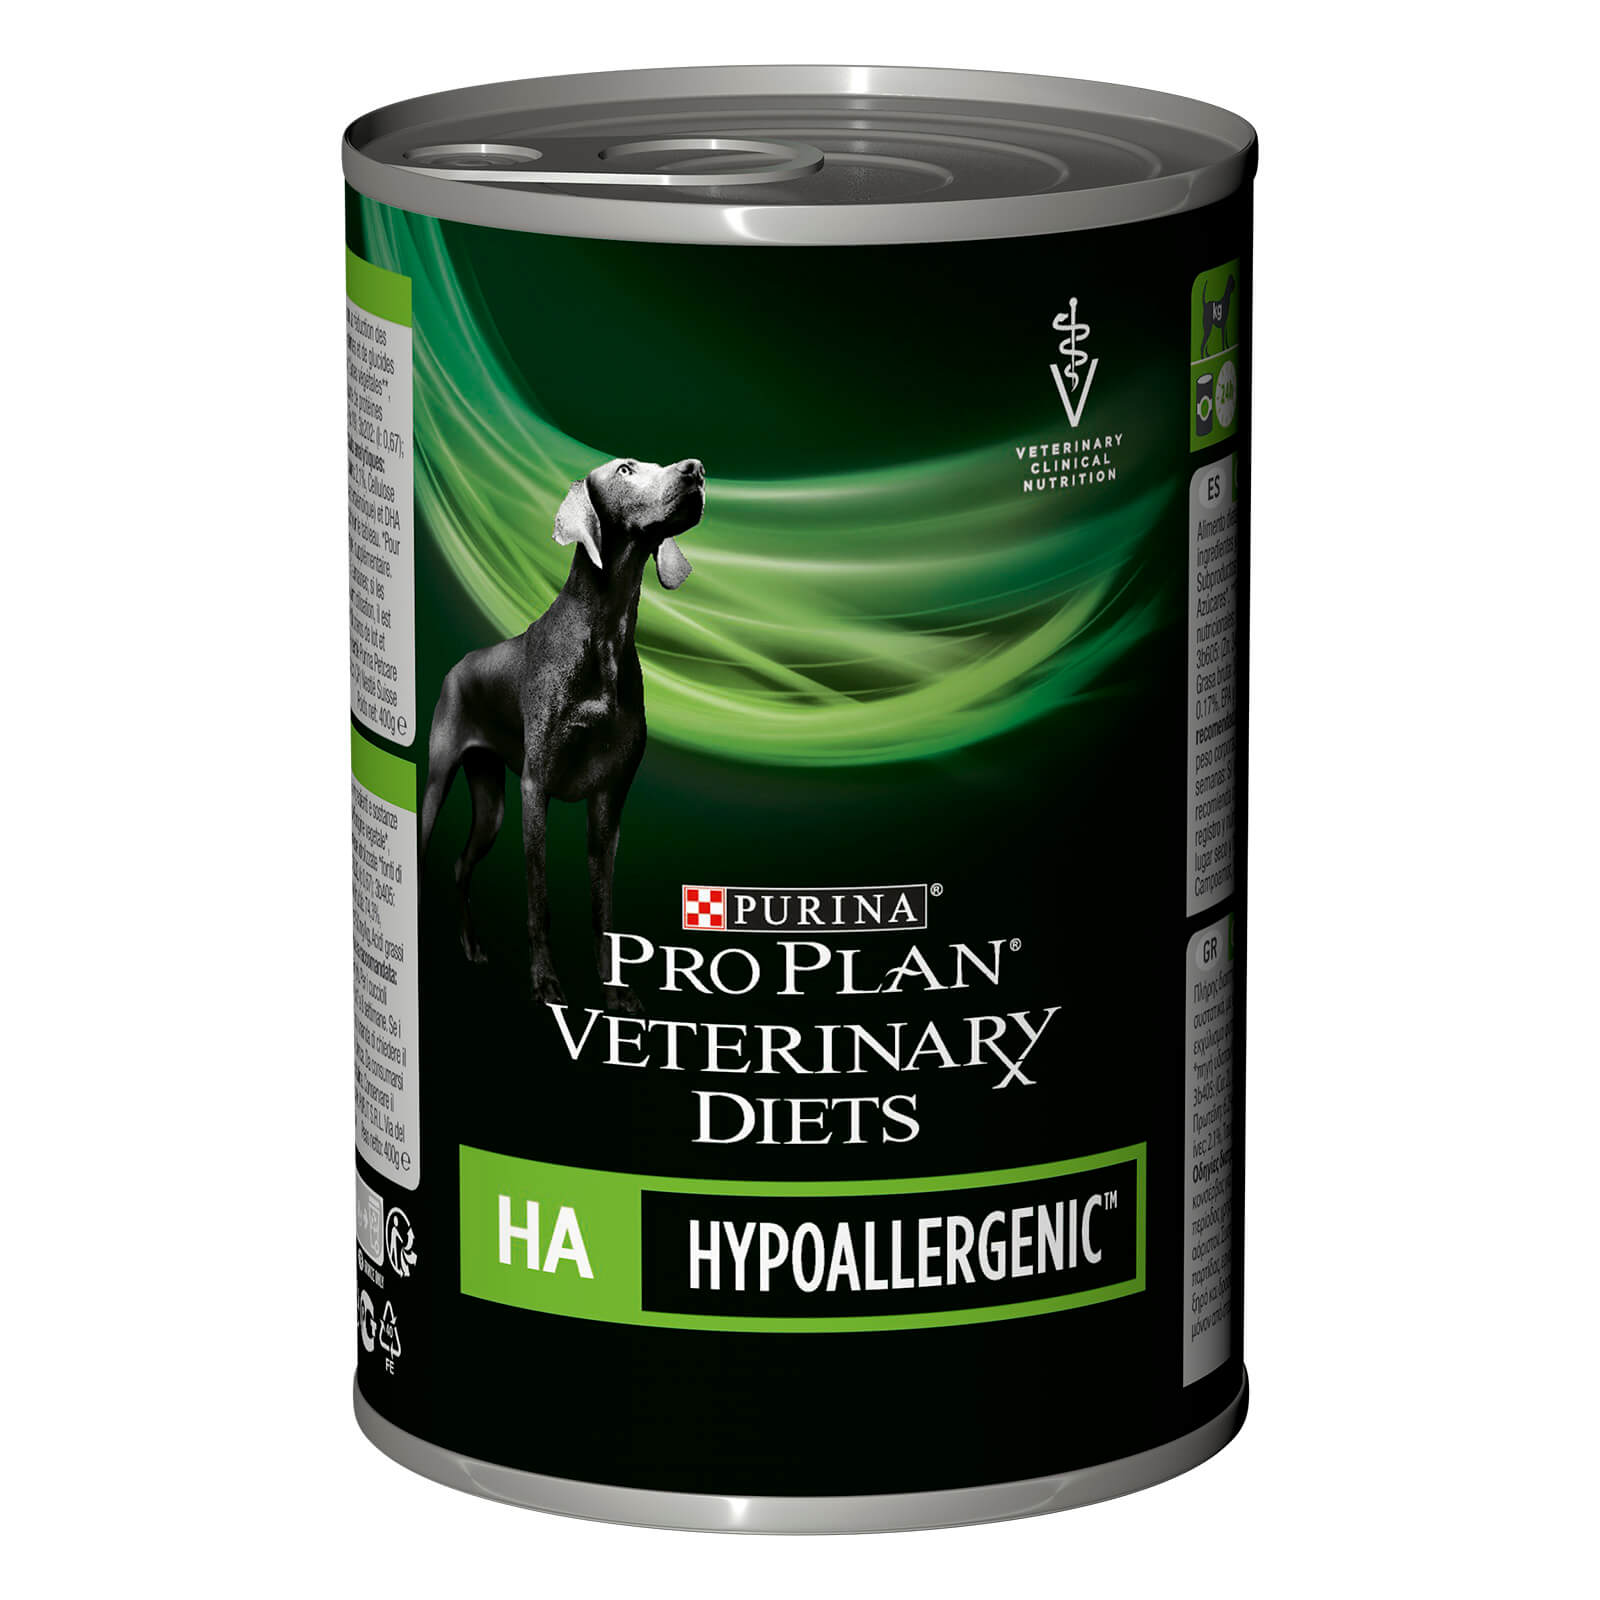 PRO PLAN® Veterinary Diets HA Hypoallergenic Canine Mousse 12x400g